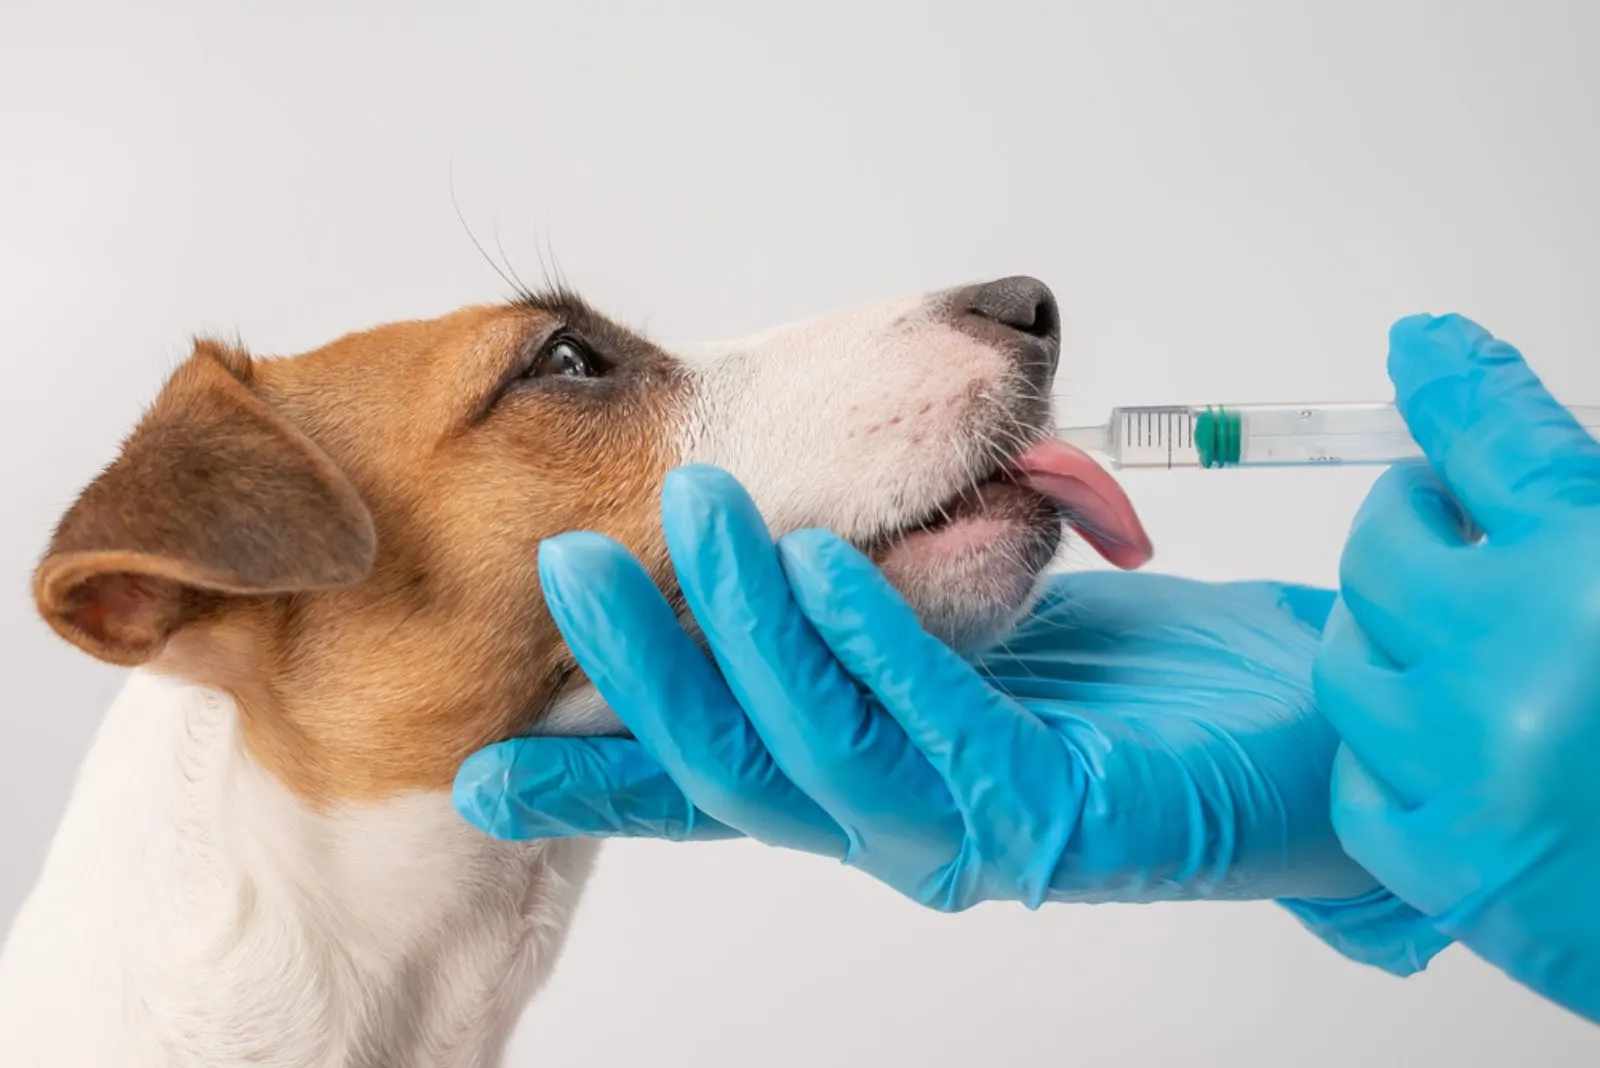 veterinarian injecting medicine from a syringe into a dog's mouth